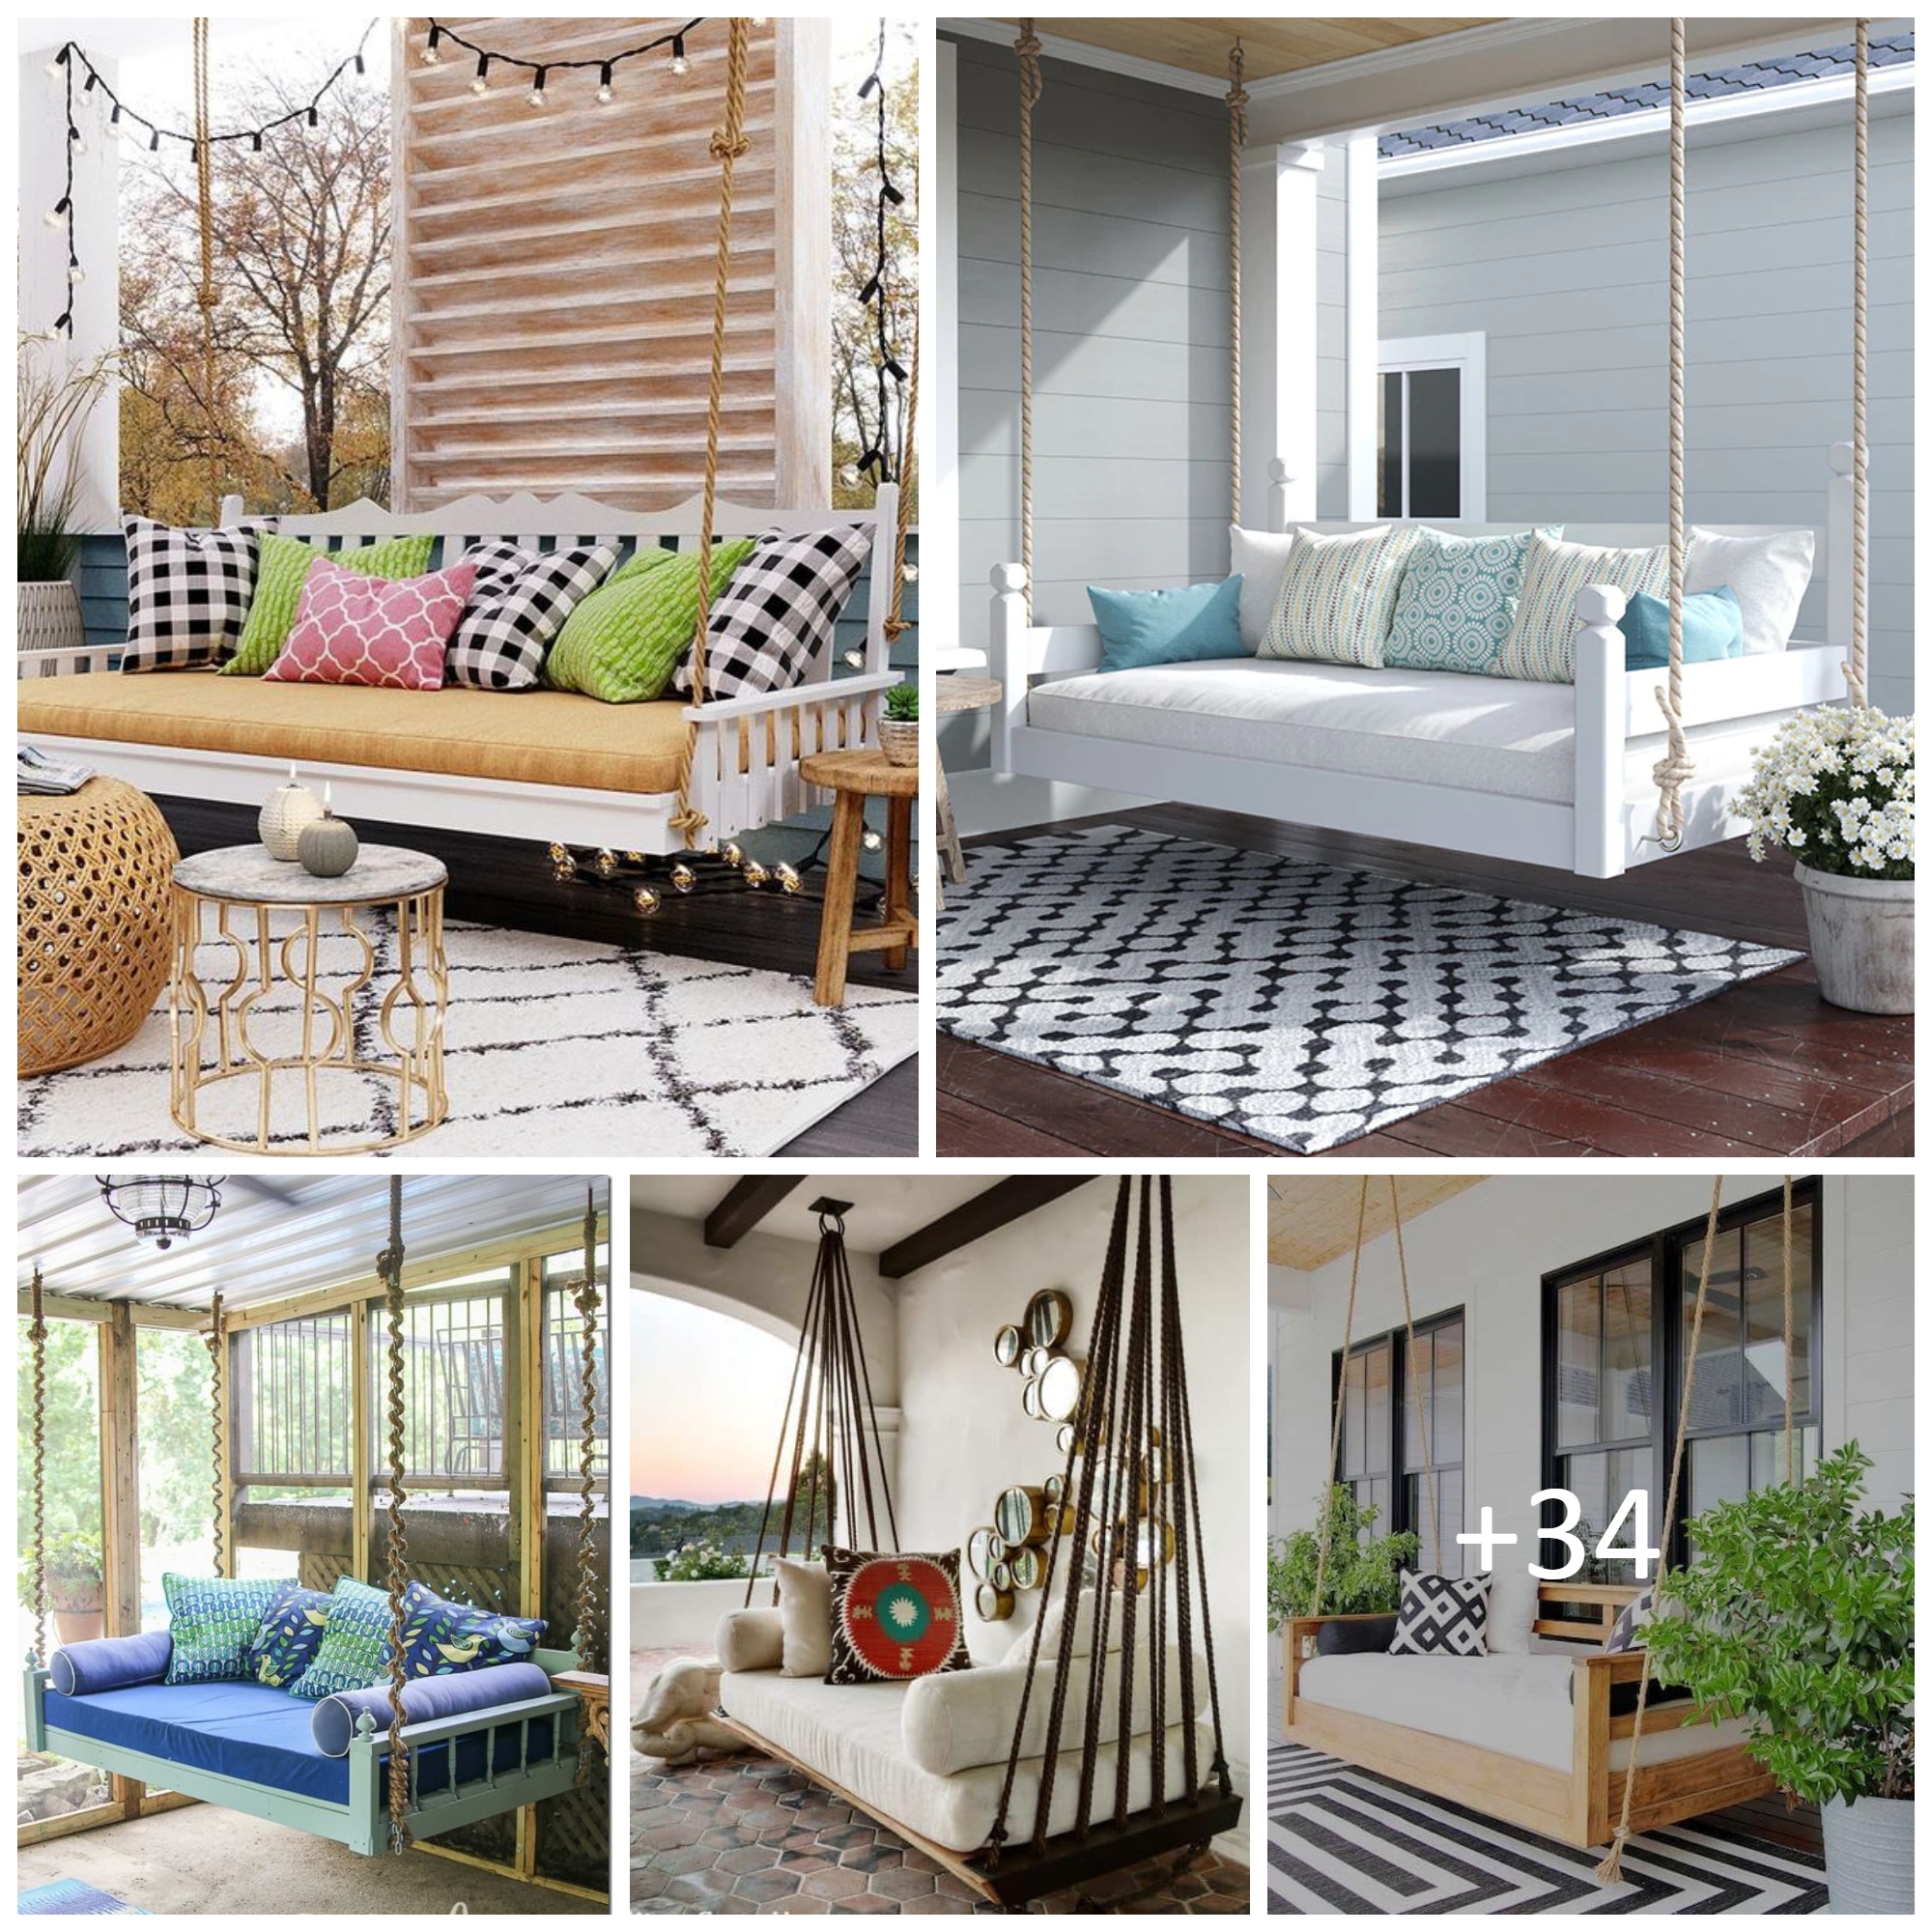 Summery Swing Bed Ideas for Gorgeous Porches